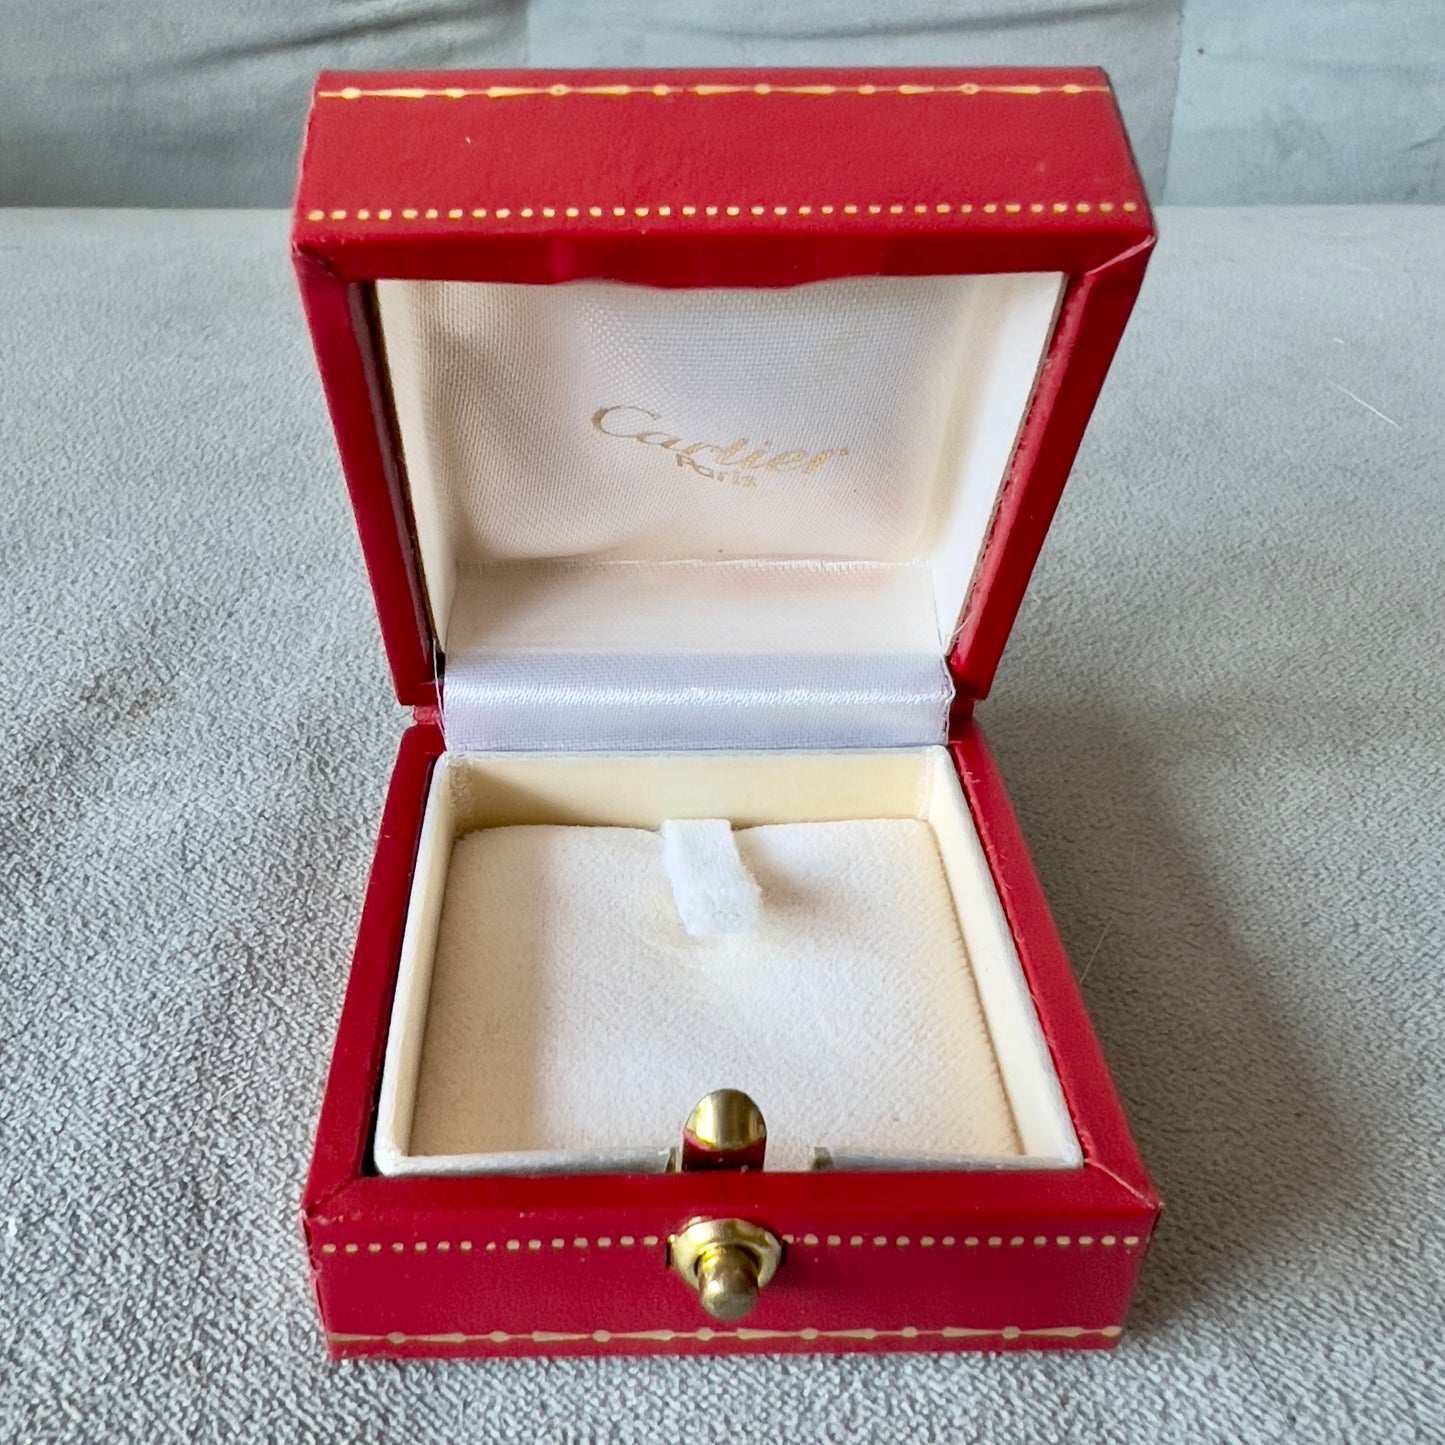 CARTIER Ring Box 2x2x1.25 inches